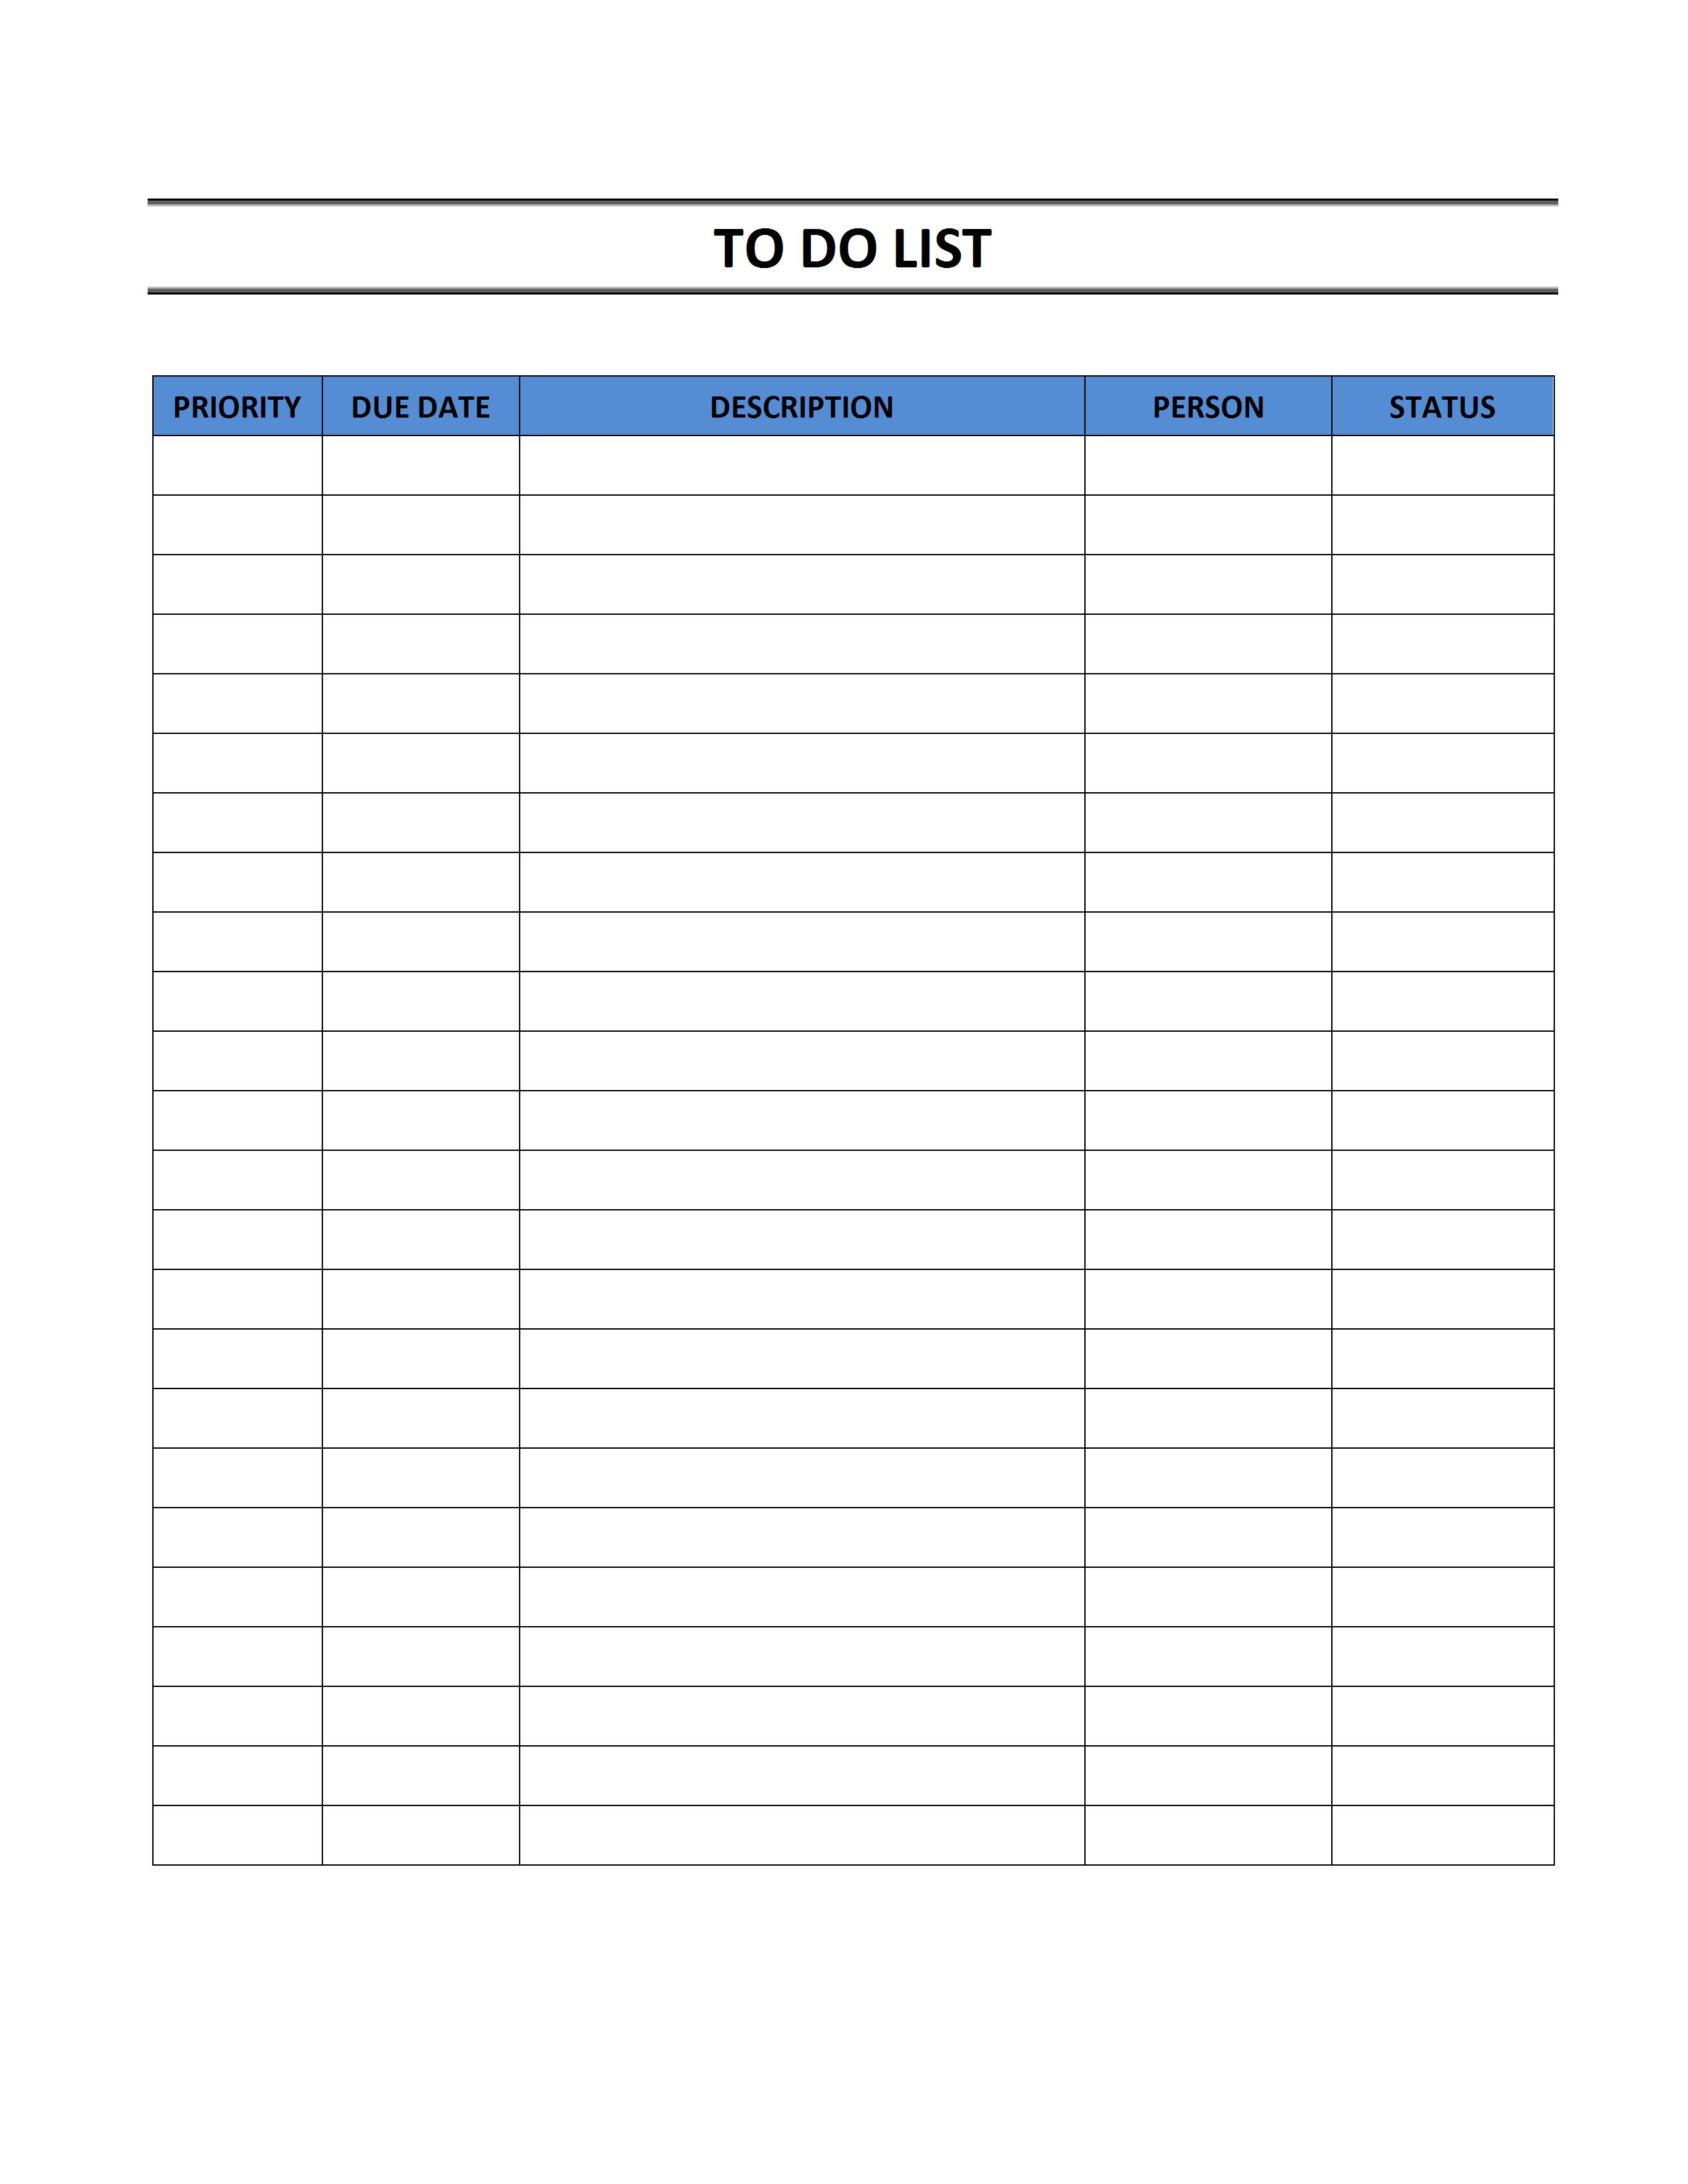 goodnotes 5 to do list template